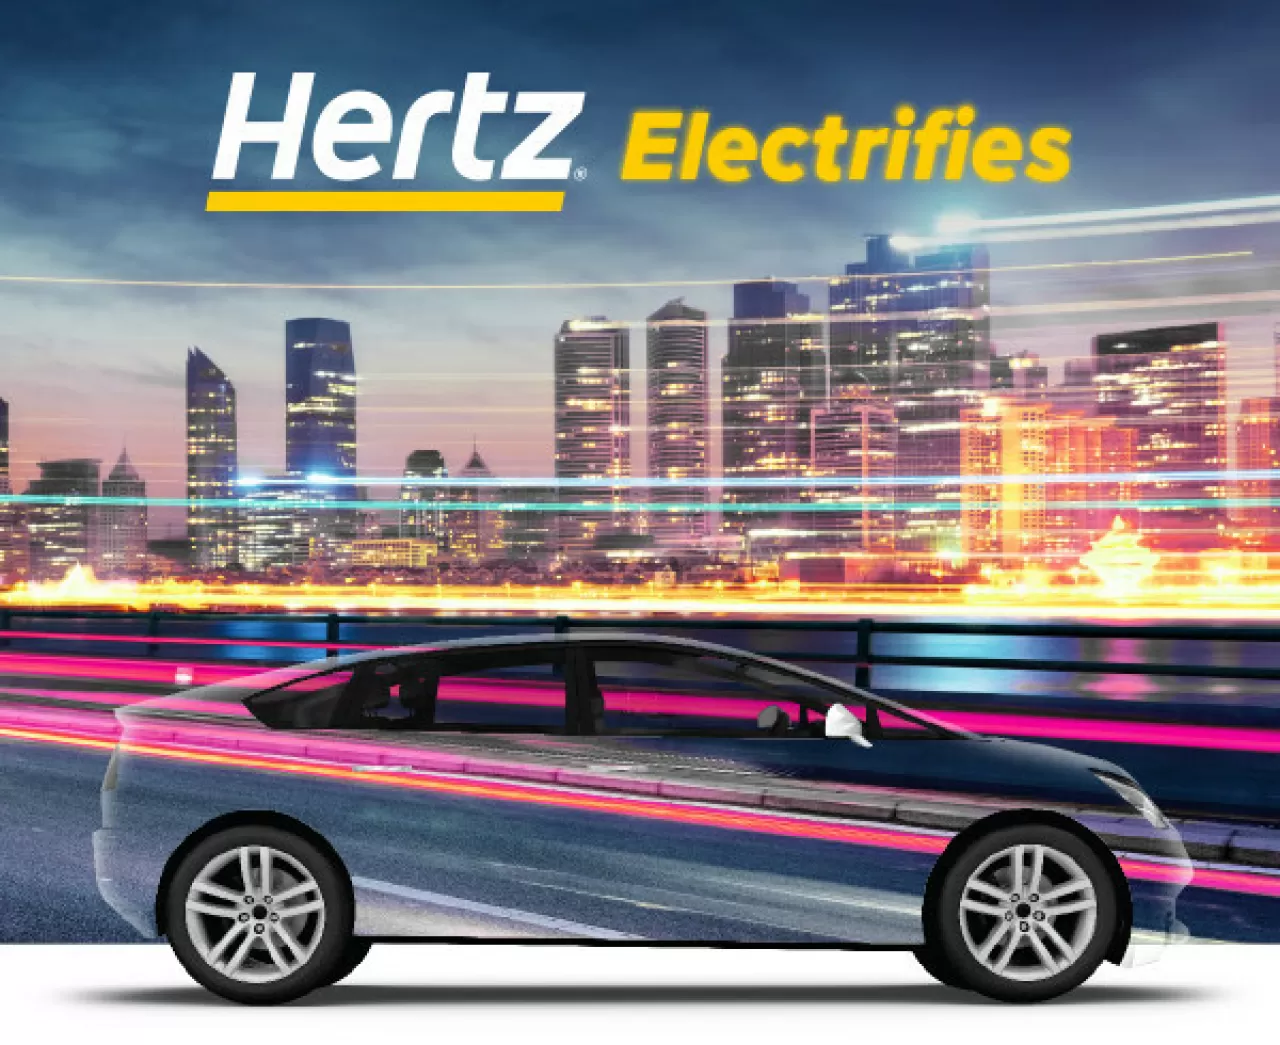 "Hertz Electrifies" is a new public-private partnership between Hertz and cities aiming to transform the rental car industry and accelerate mainstream consumer adoption of electric vehicles. img#1